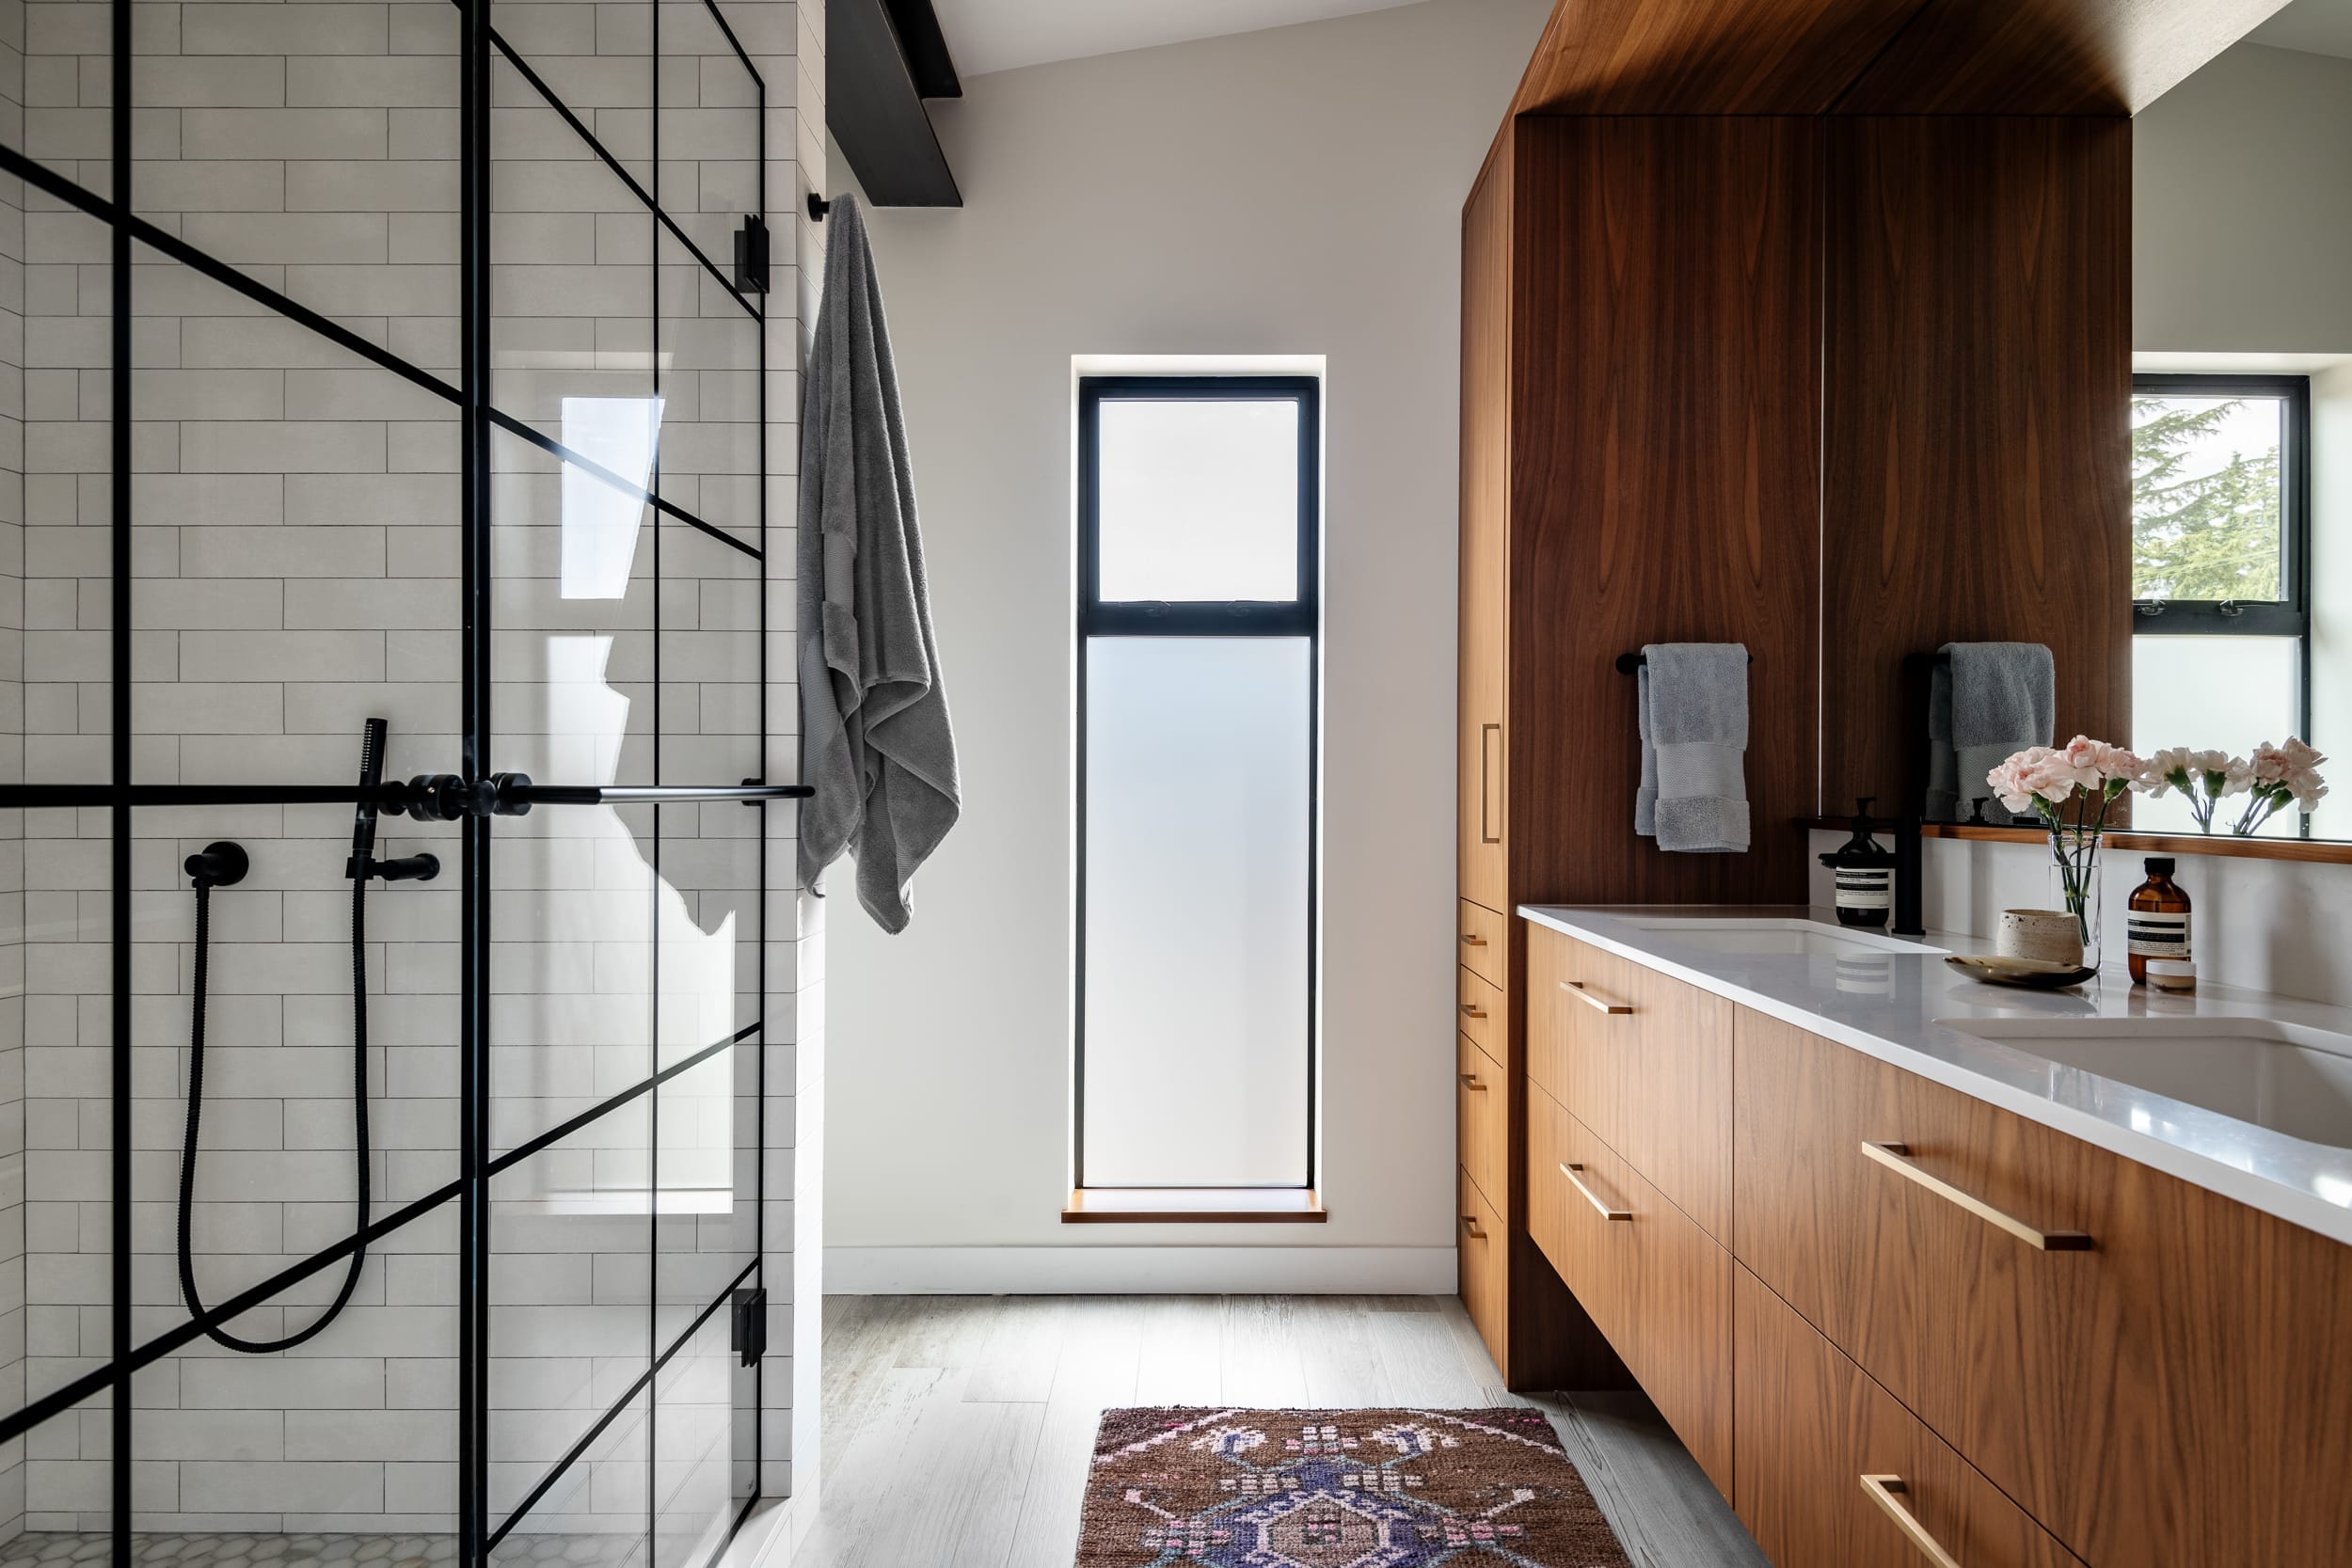 A modern bathroom with wooden cabinets and a glass shower.